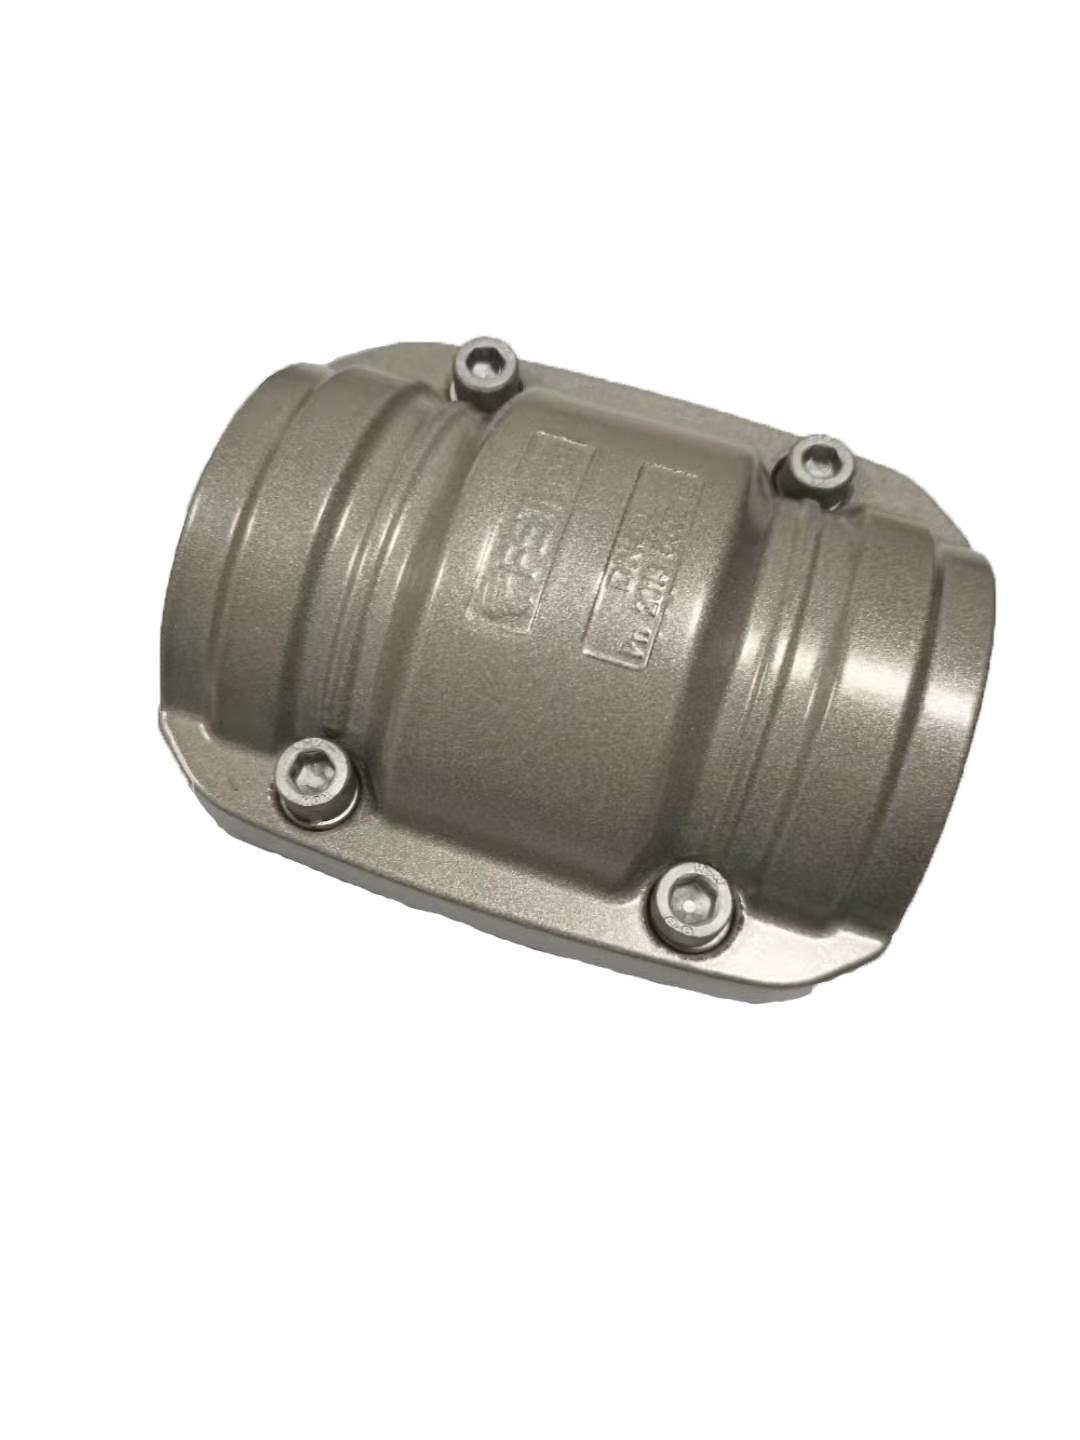 FSTpipe Equal Socket for compressed air piping system 3